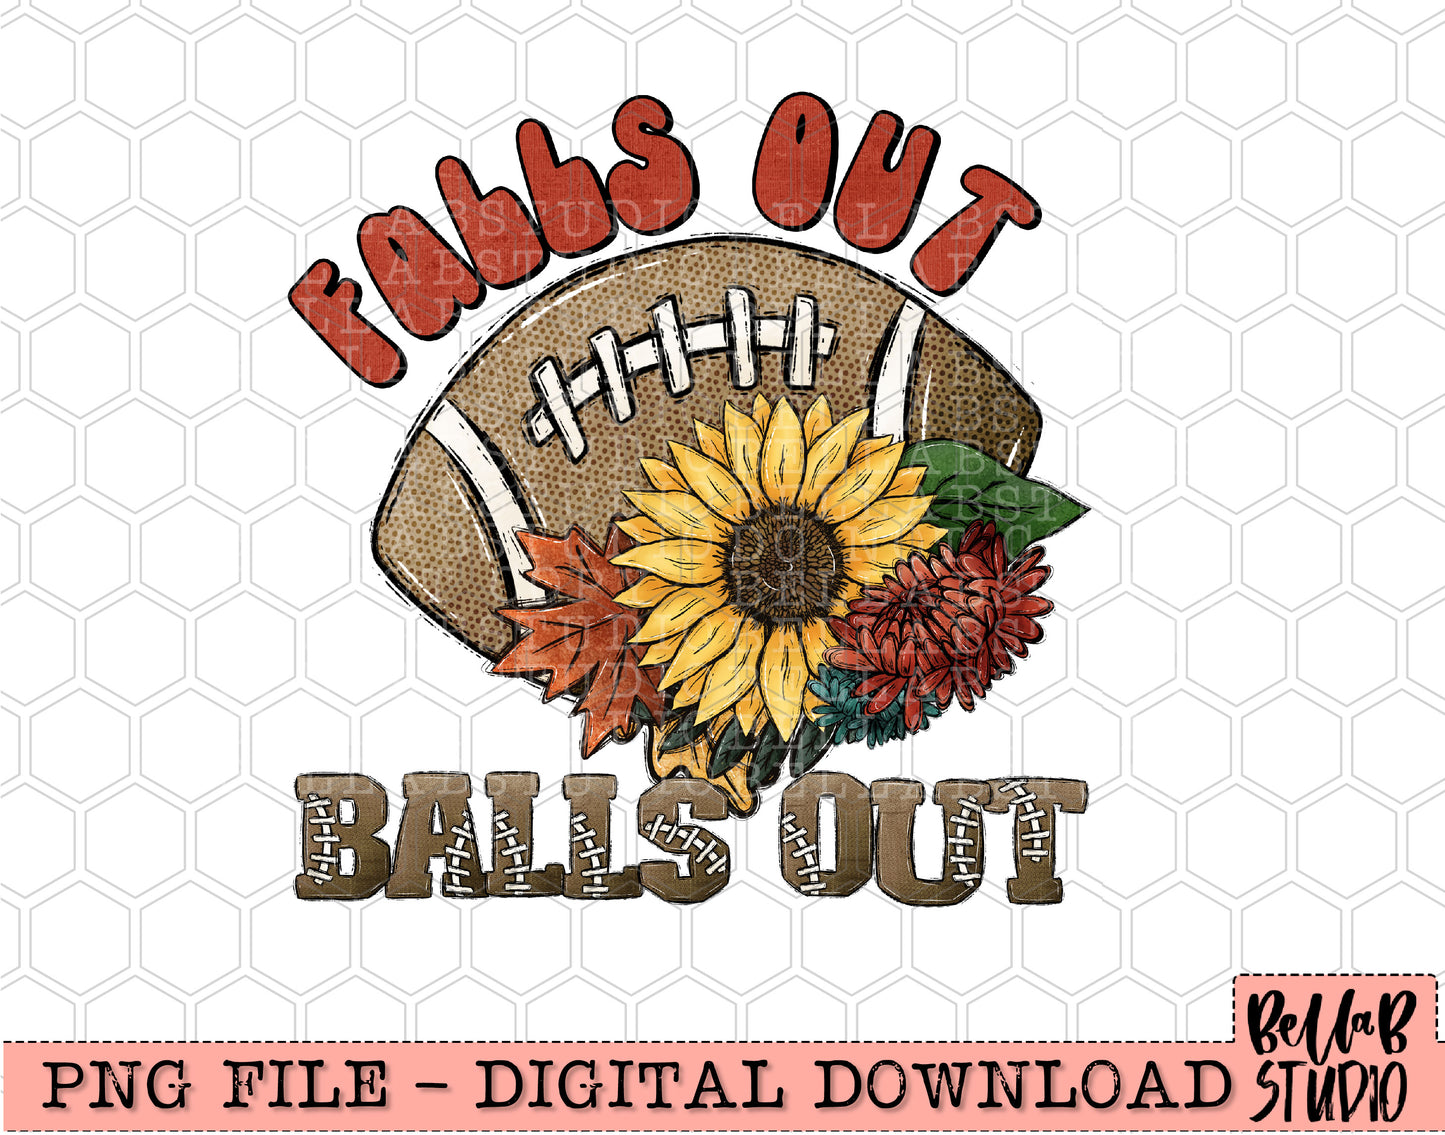 Falls out Balls Out PNG Design